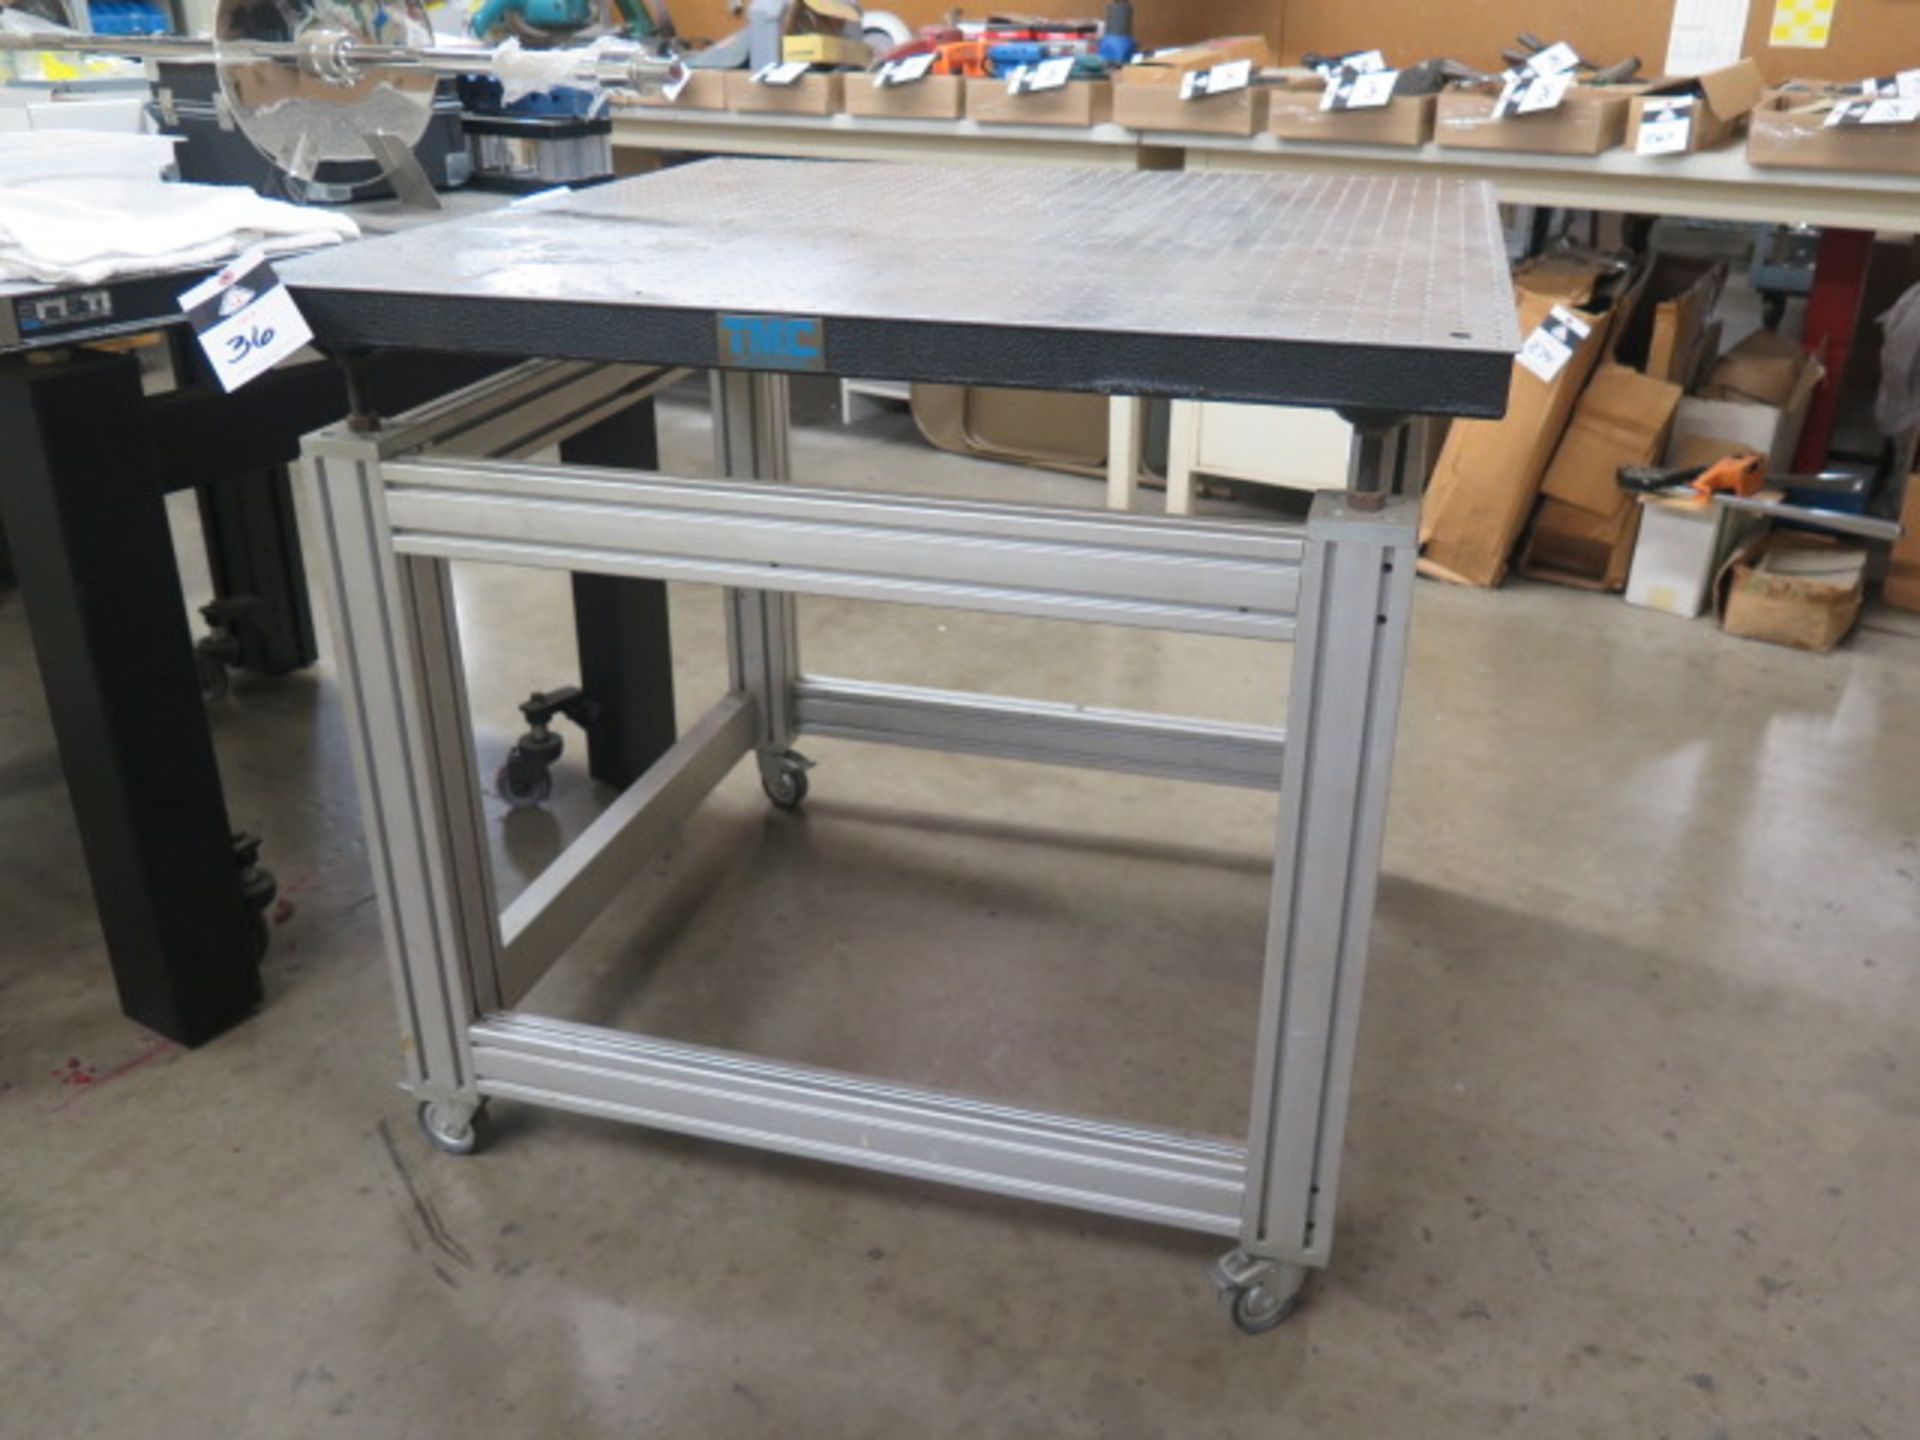 TMC 39” x 39” Honeycomb Technical Lab Test Table w/ Wheels (SOLD AS-IS - NO WARRANTY) - Image 2 of 8